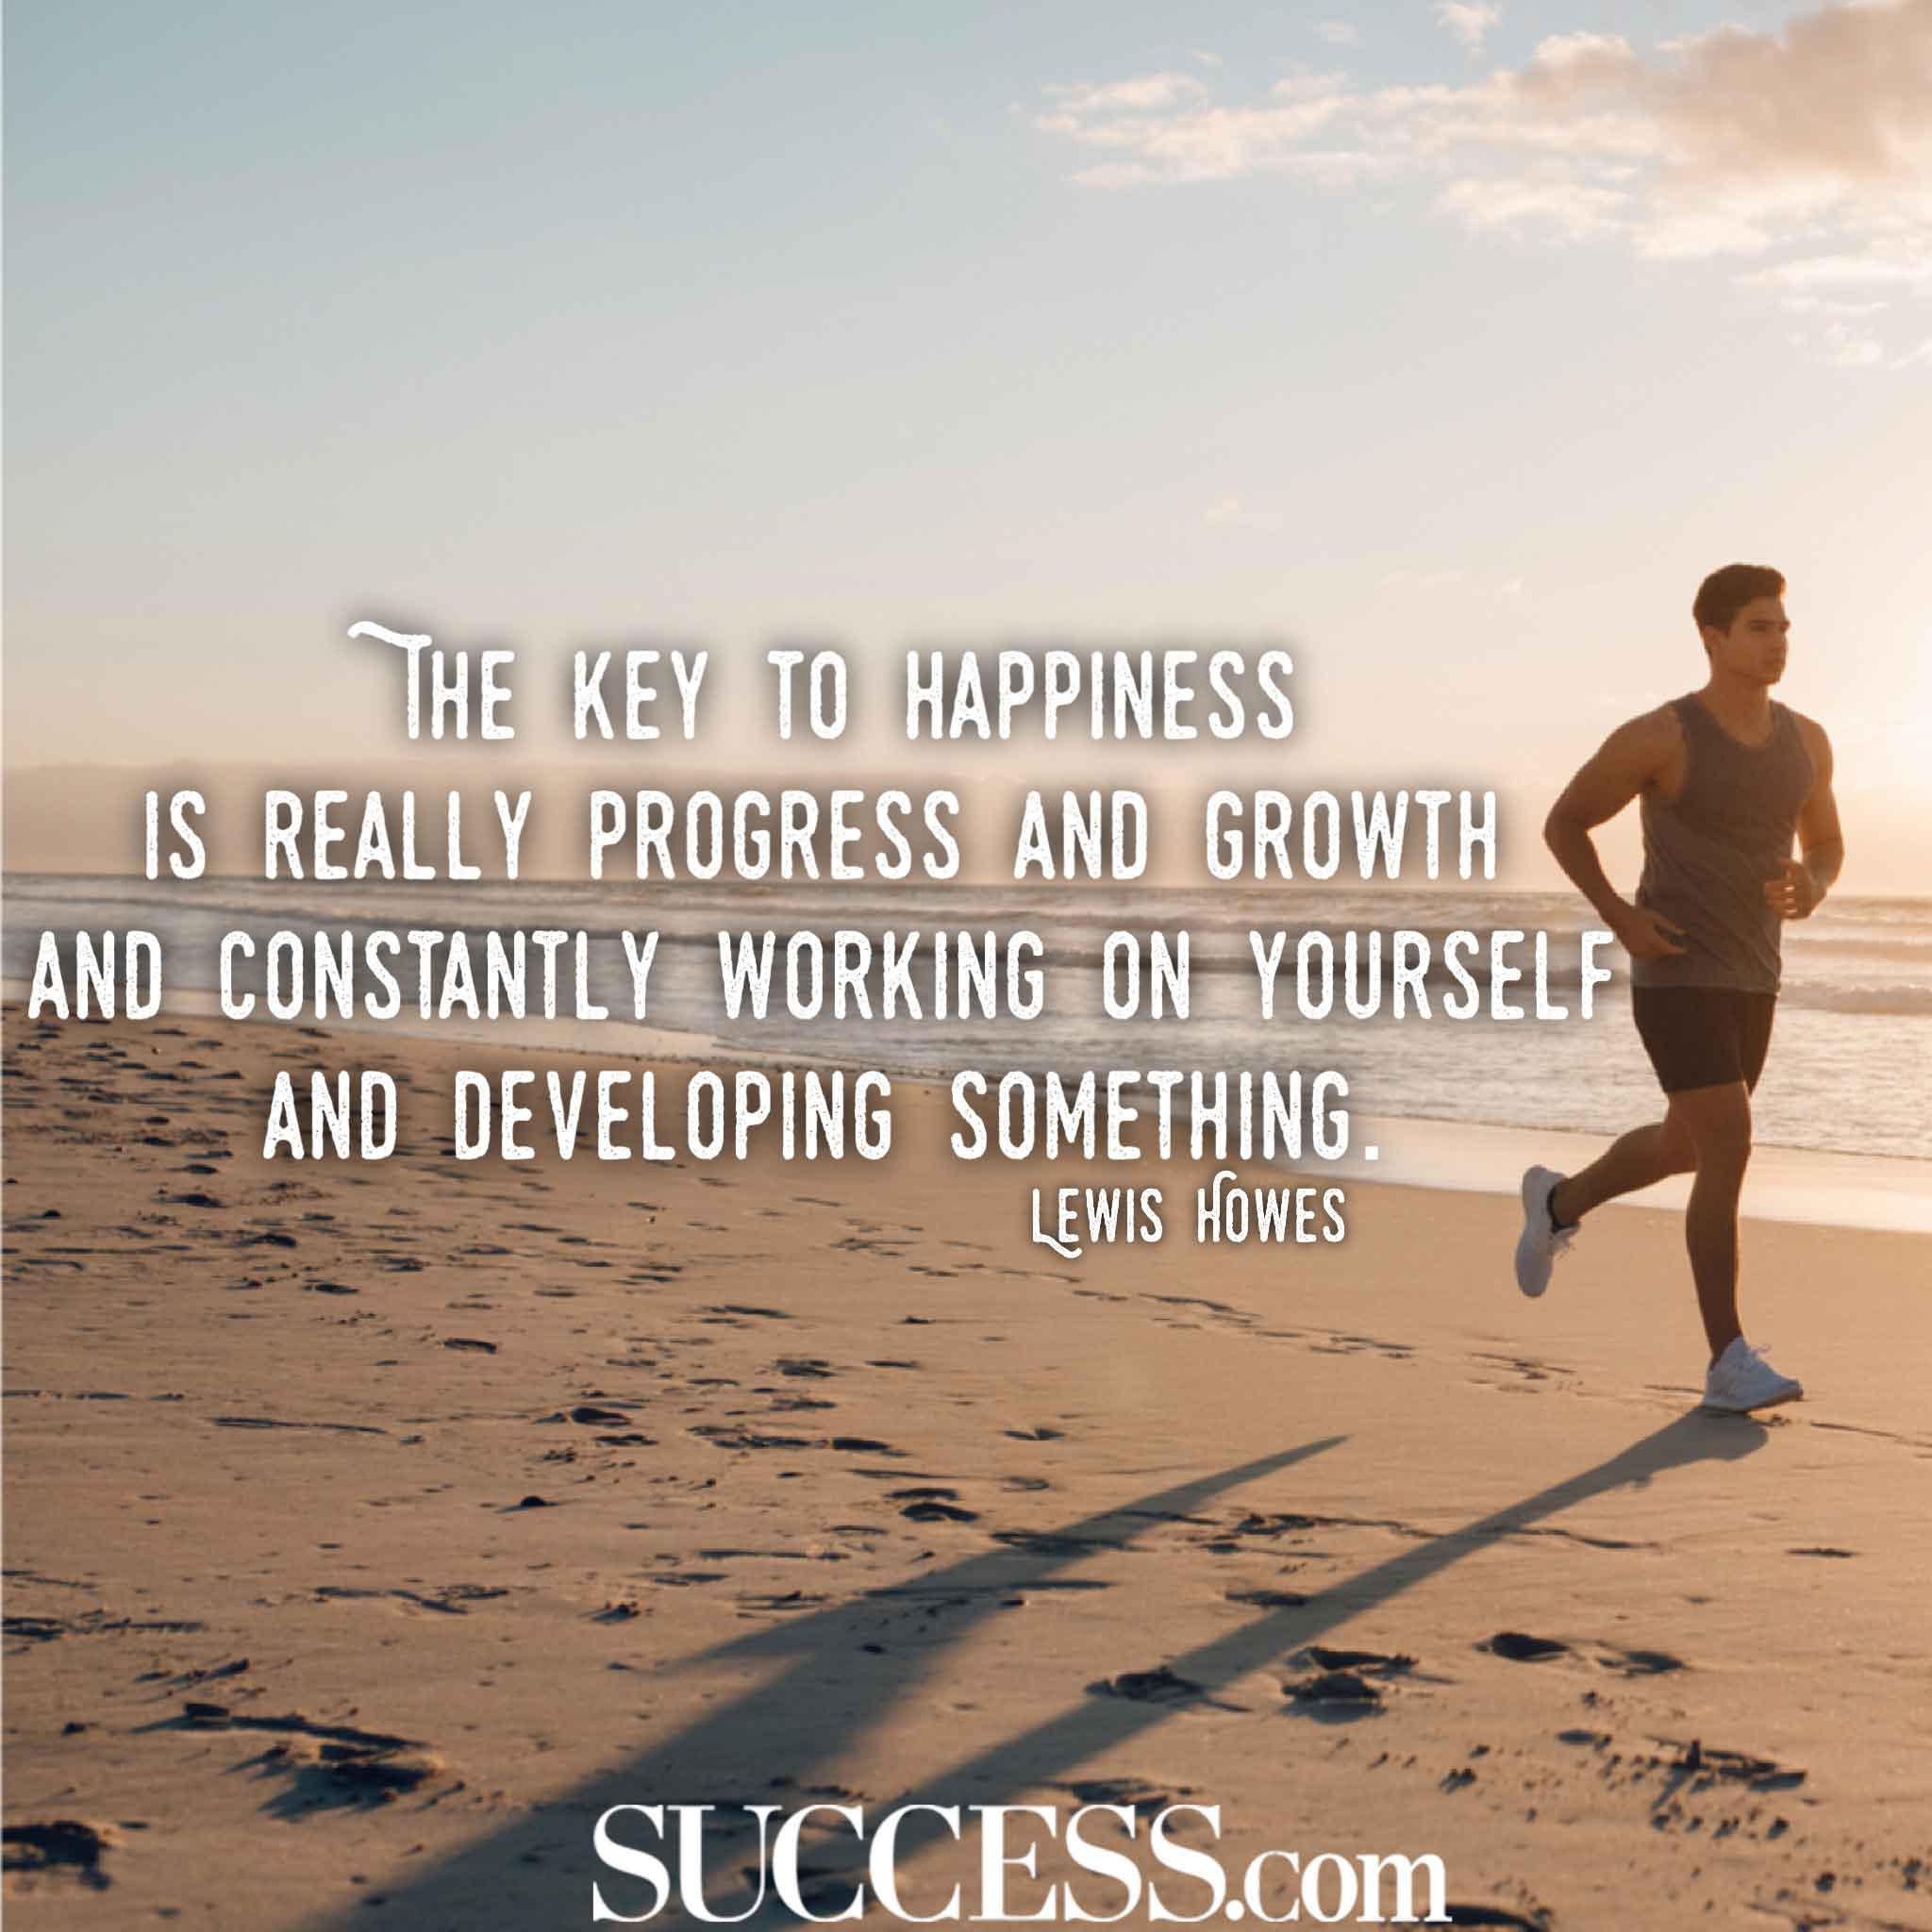 12 Motivational Quotes About Improving Yourself